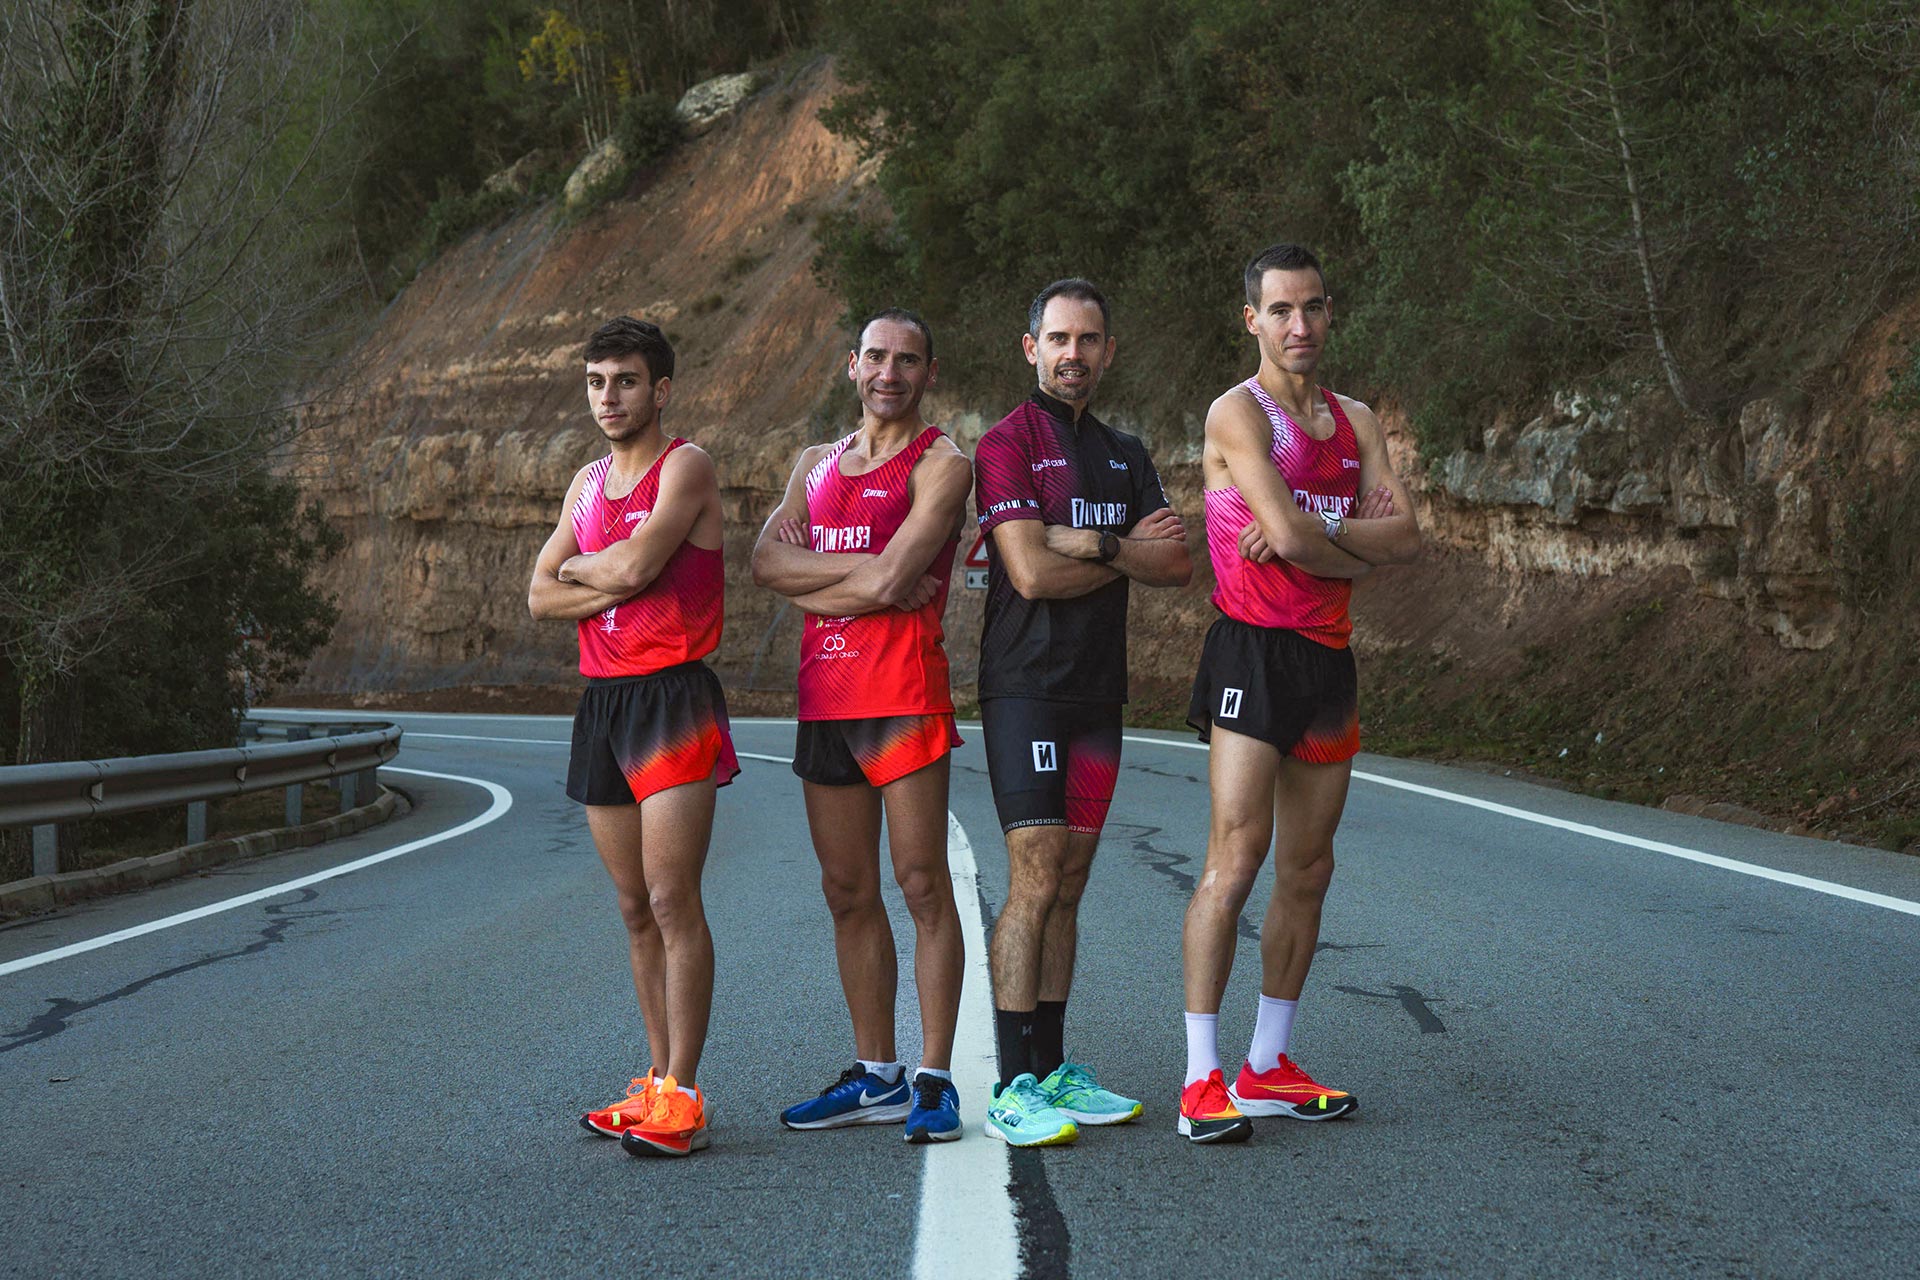 On running - performance innovante pour les coureurs I SportX